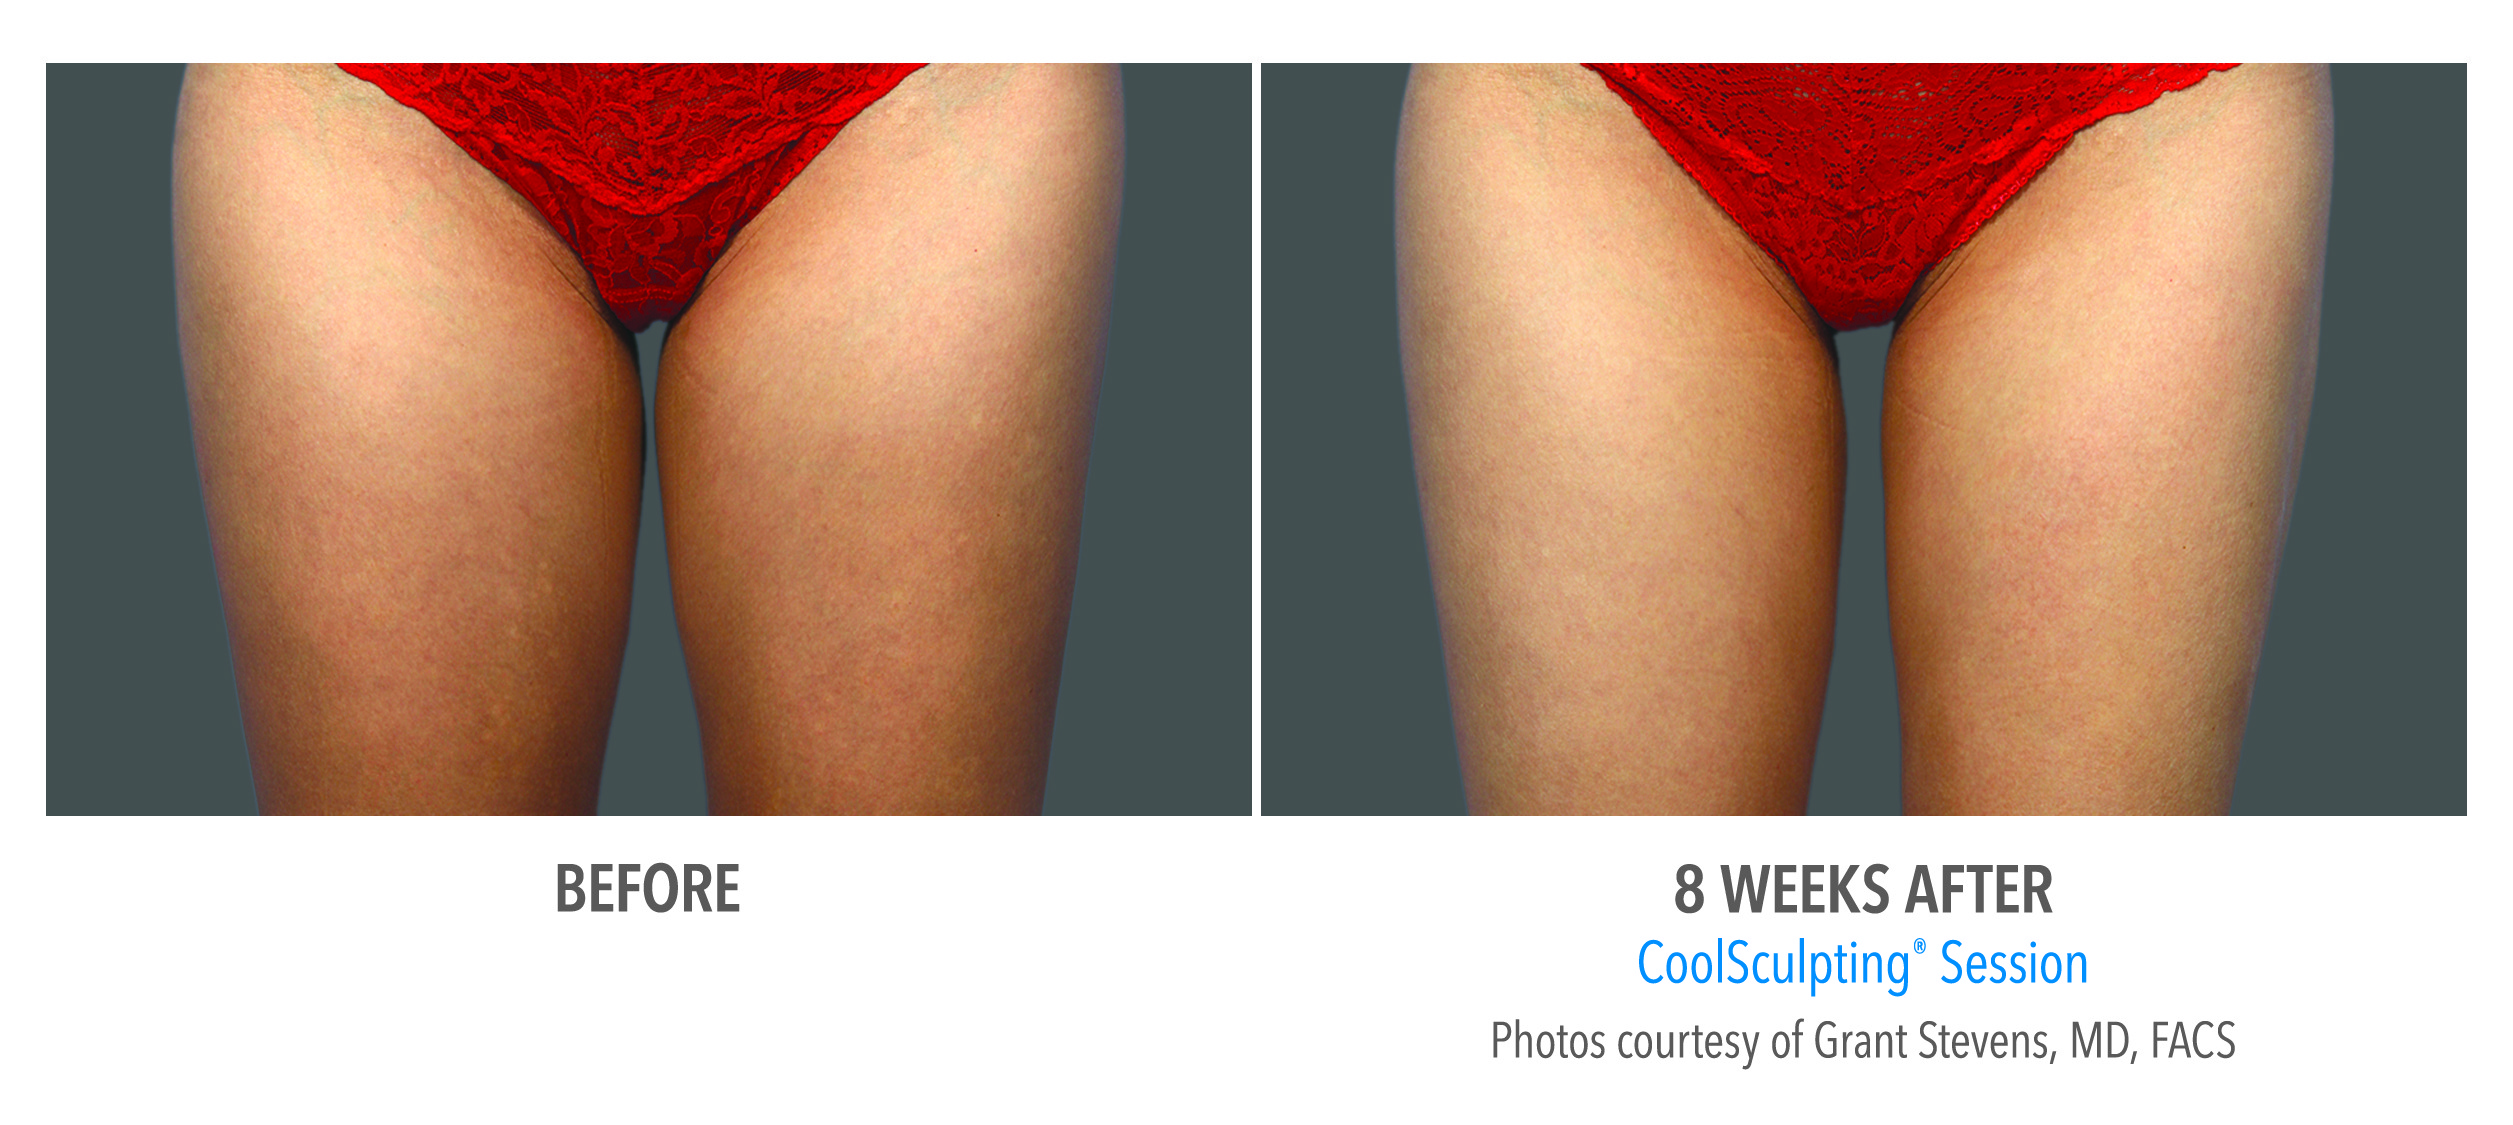 Coolsculpting of the thighs can show significant results up to 8 weeks.